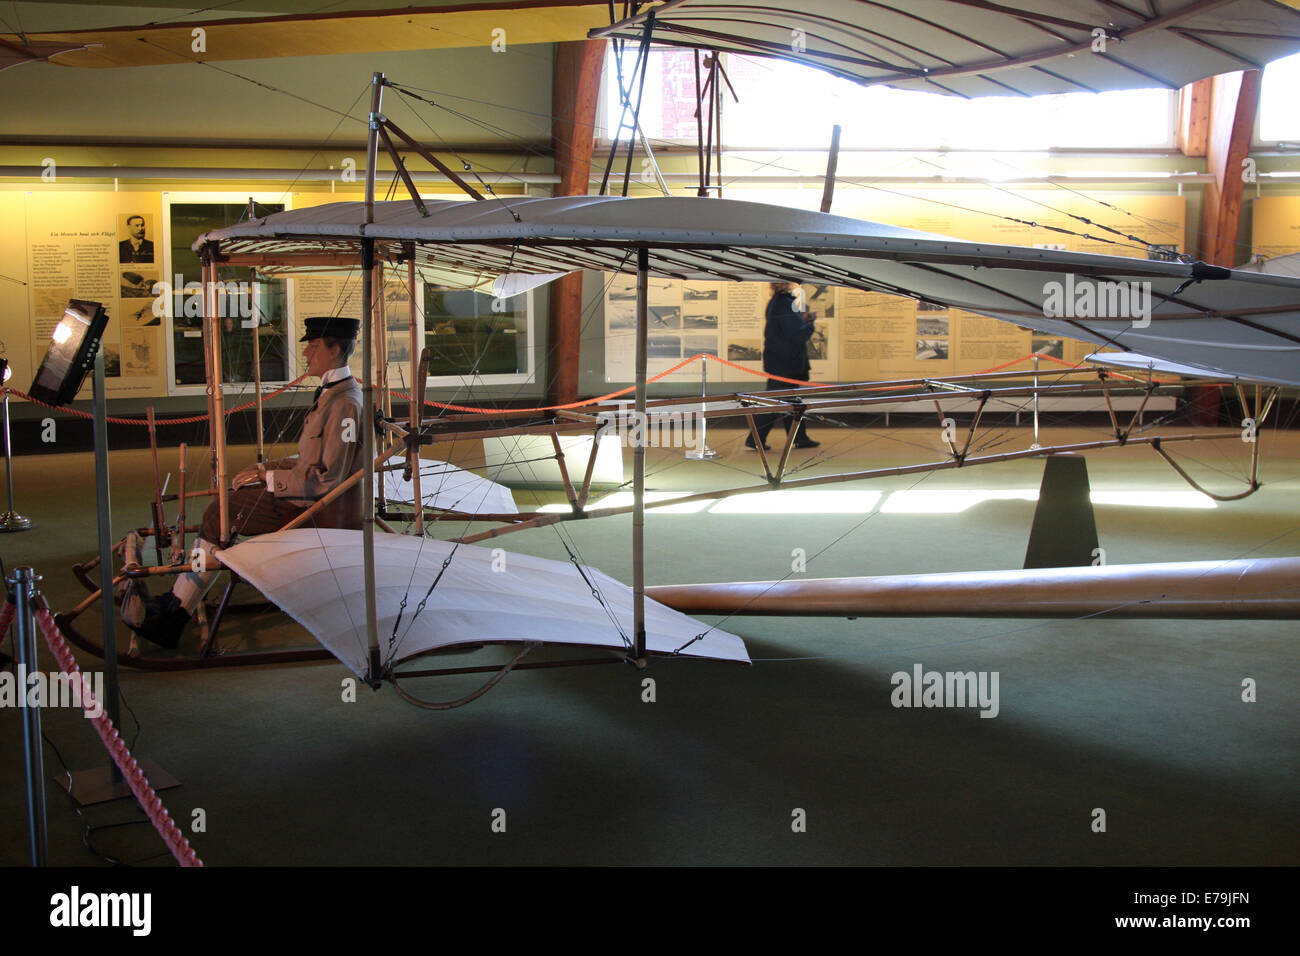 The Wasserkuppe in the Rhoen is the birthplace of modern gliding. There it was invented in the early 20th century. On the same place there is also the German glider museum. Photo: Klaus Nowottnick Date: October 09, 2010 Stock Photo